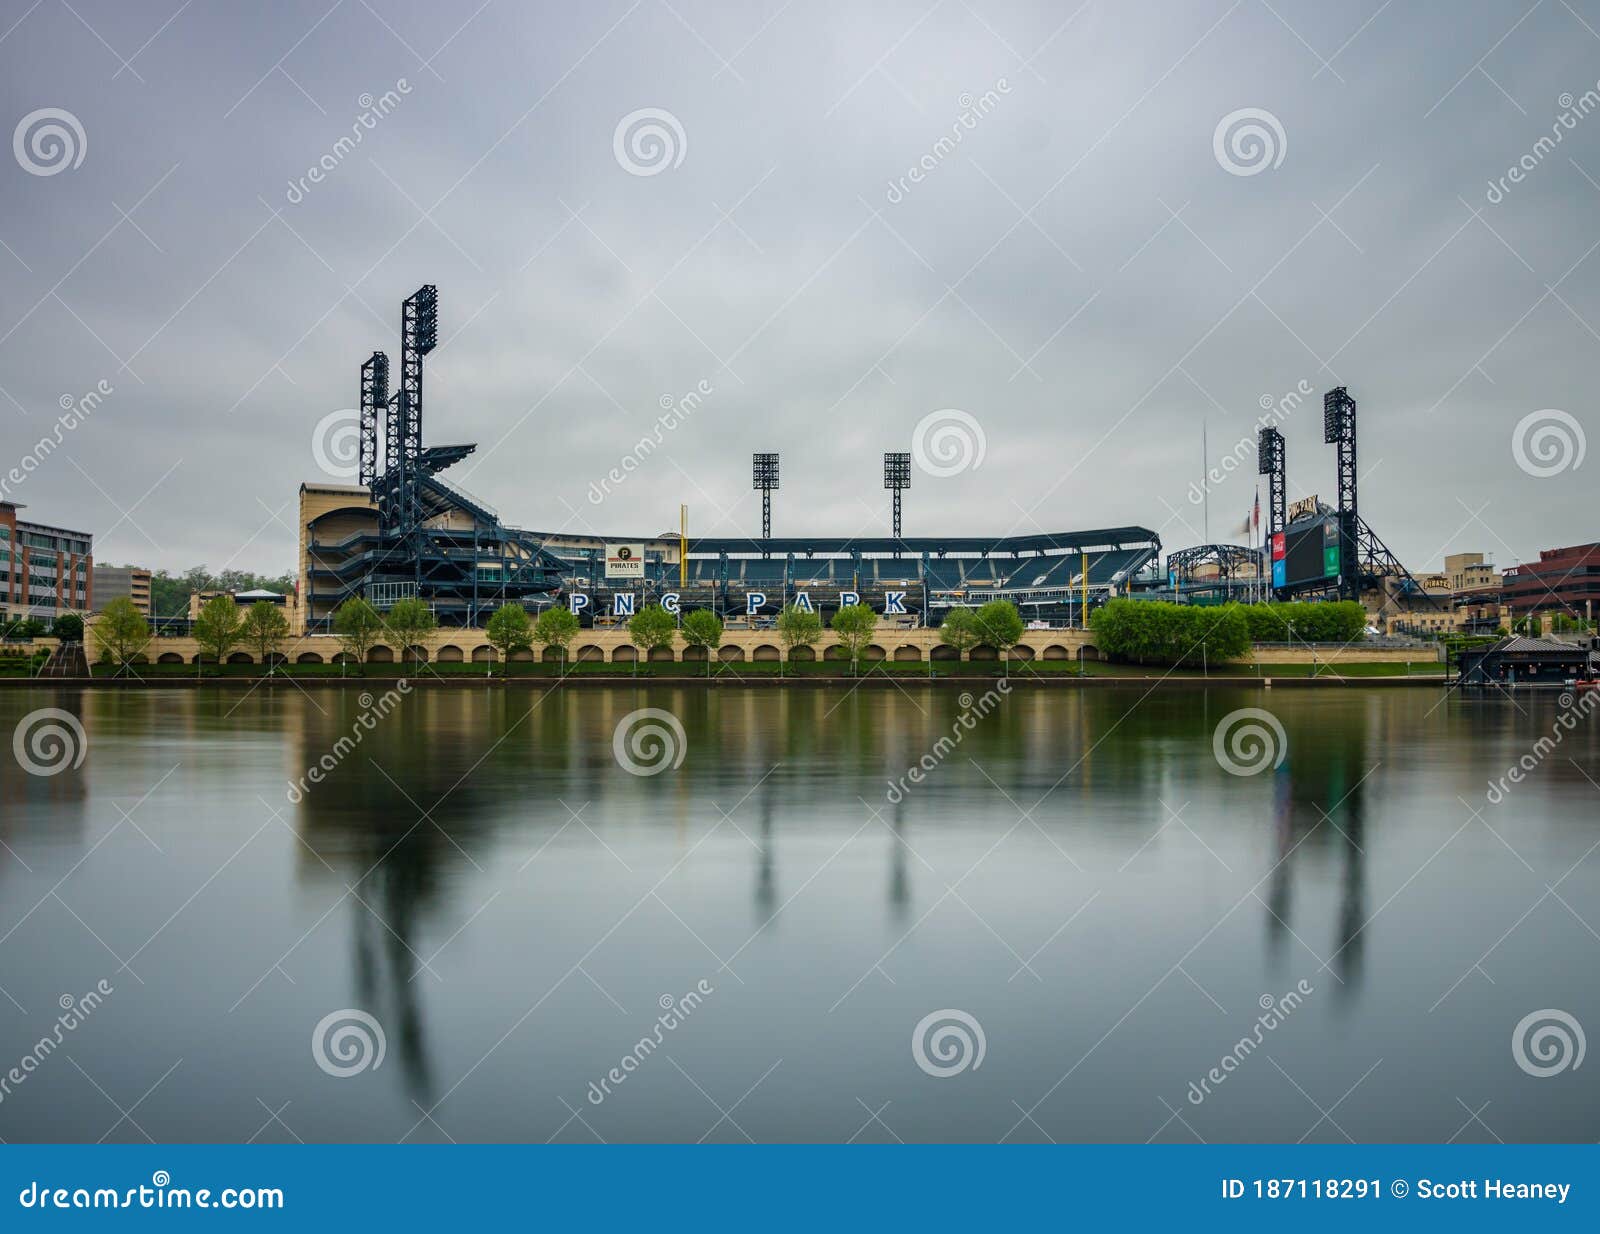 Boats on the Allegheny River in front of PNC Park, Pittsburgh, Pennsylvania  Stock Photo - Alamy